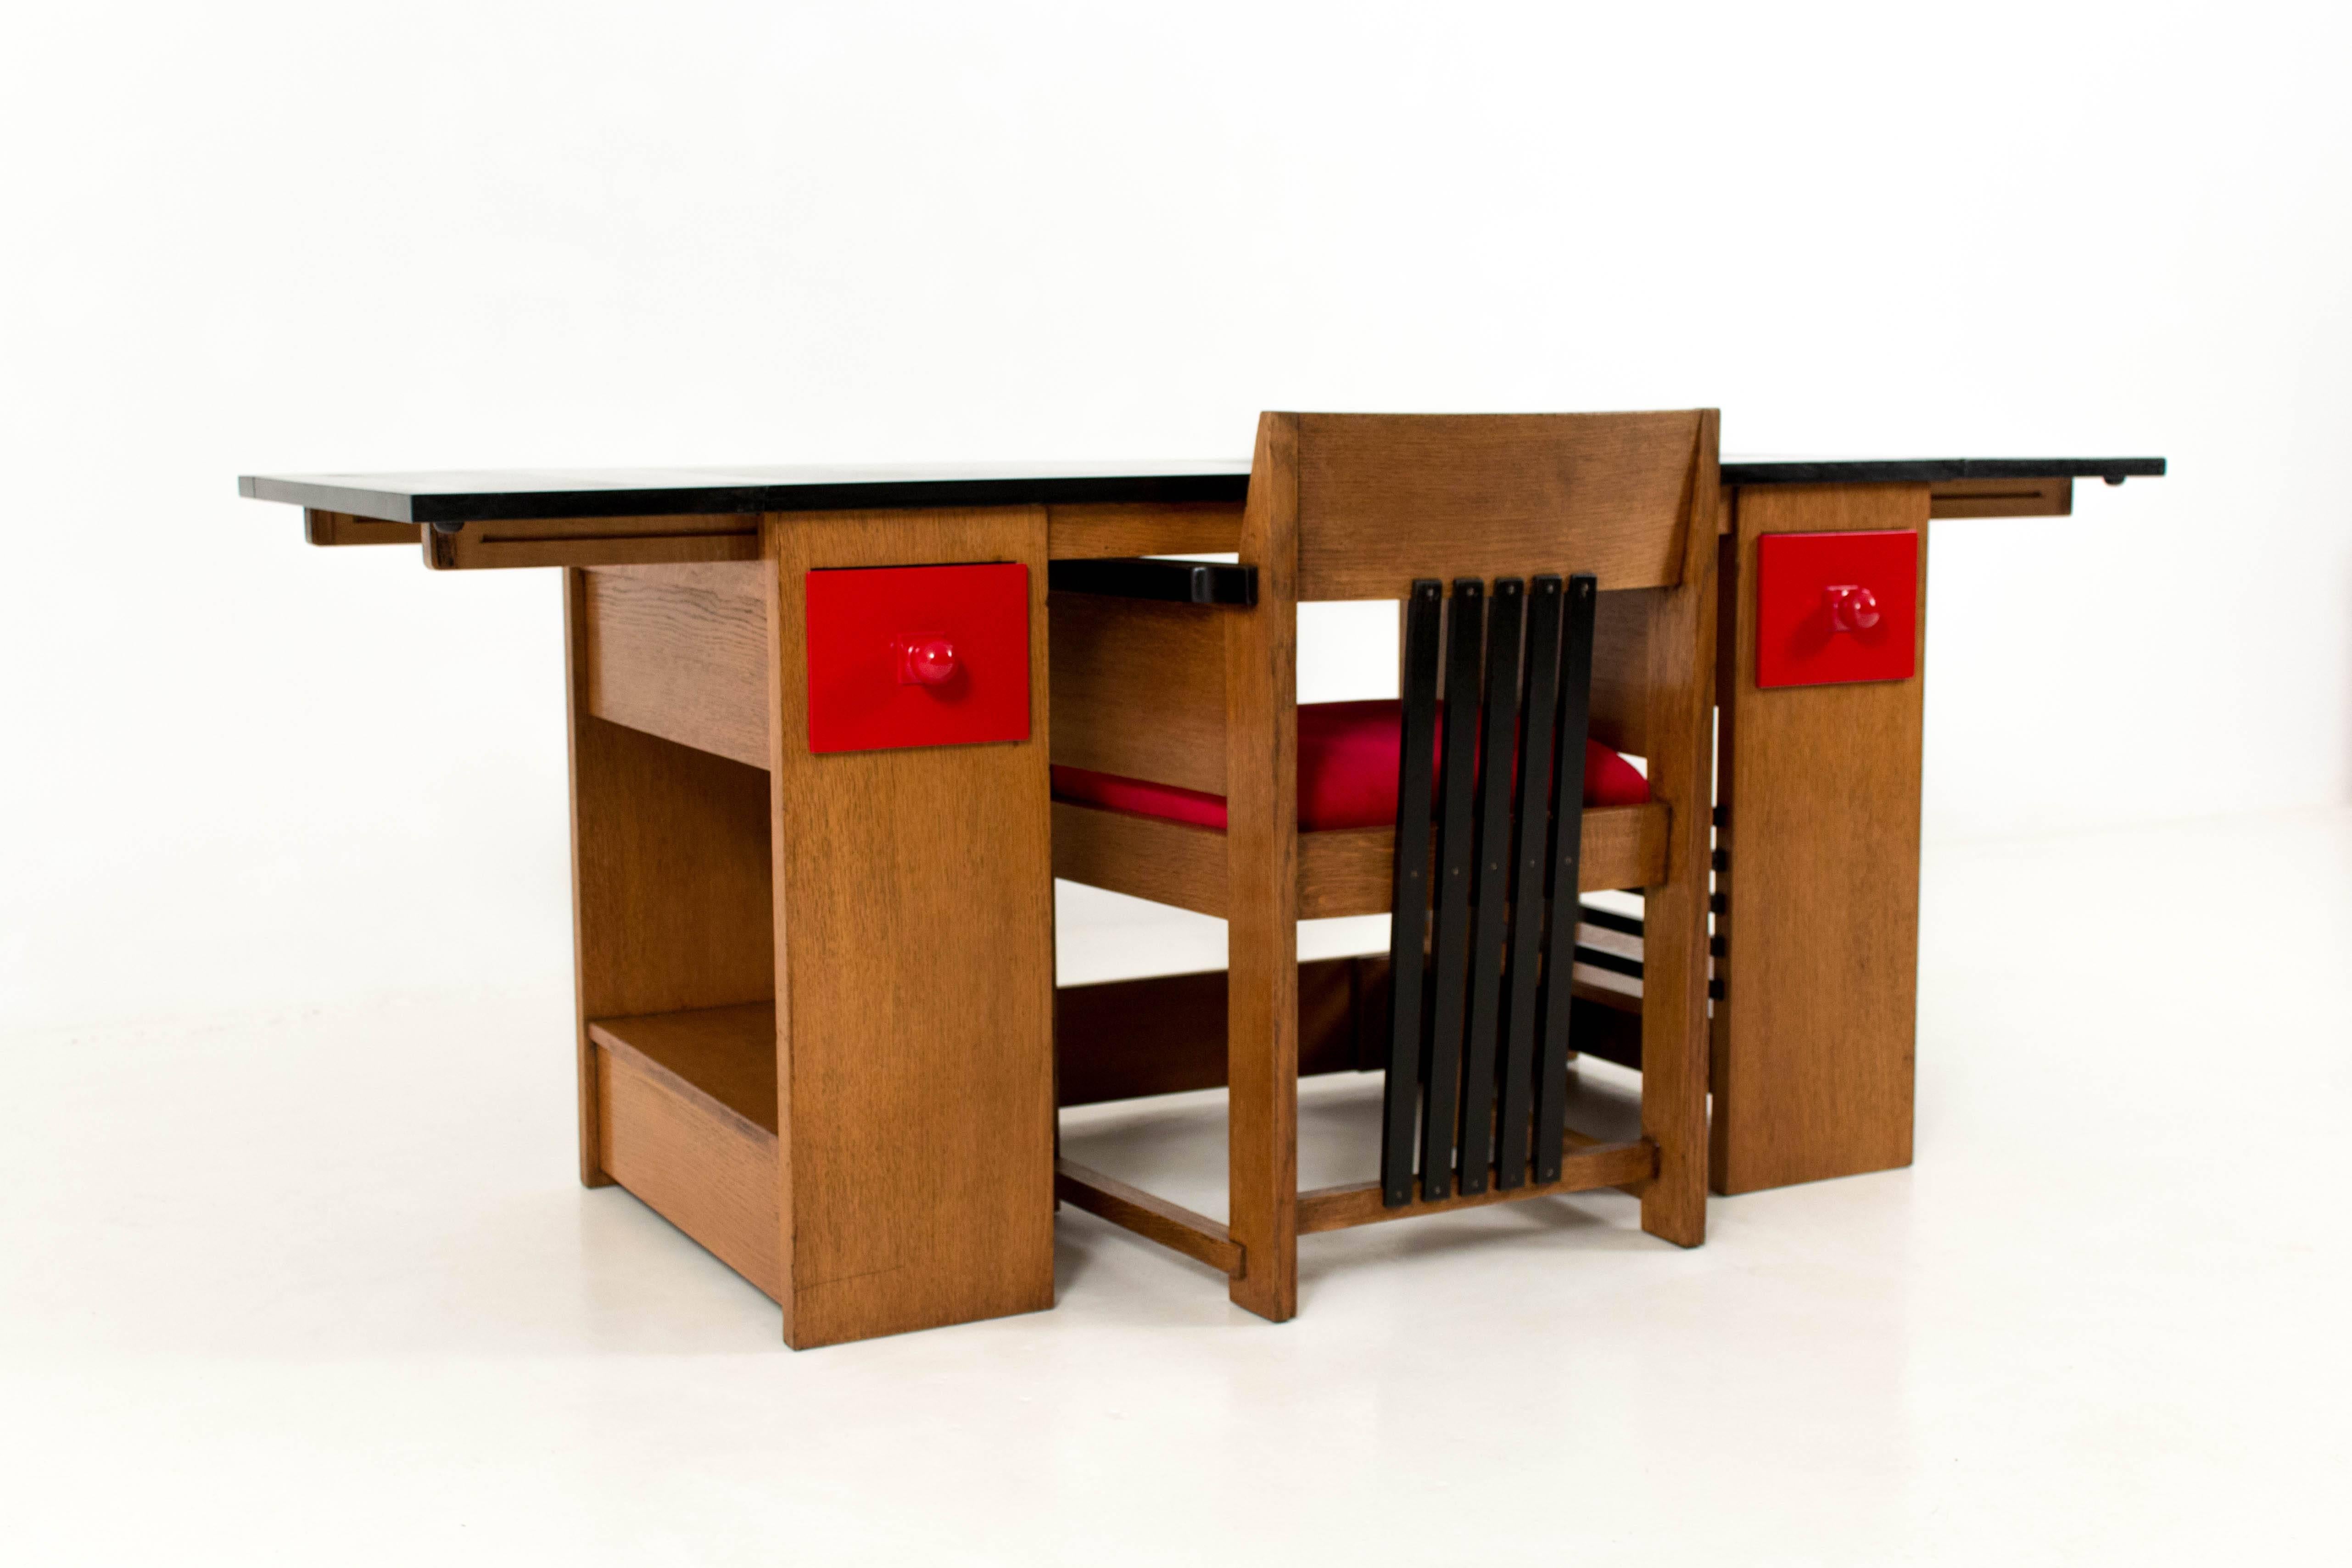 Important and rare Art Deco Haagse School desk and armchair by Henk Wouda for Pander, 1927.
Stunning design and part of a set with matching sideboard.
This set was part of the BKI exhibition in the Stedelijk Museum in Amsterdam in
1927.
Oak, red